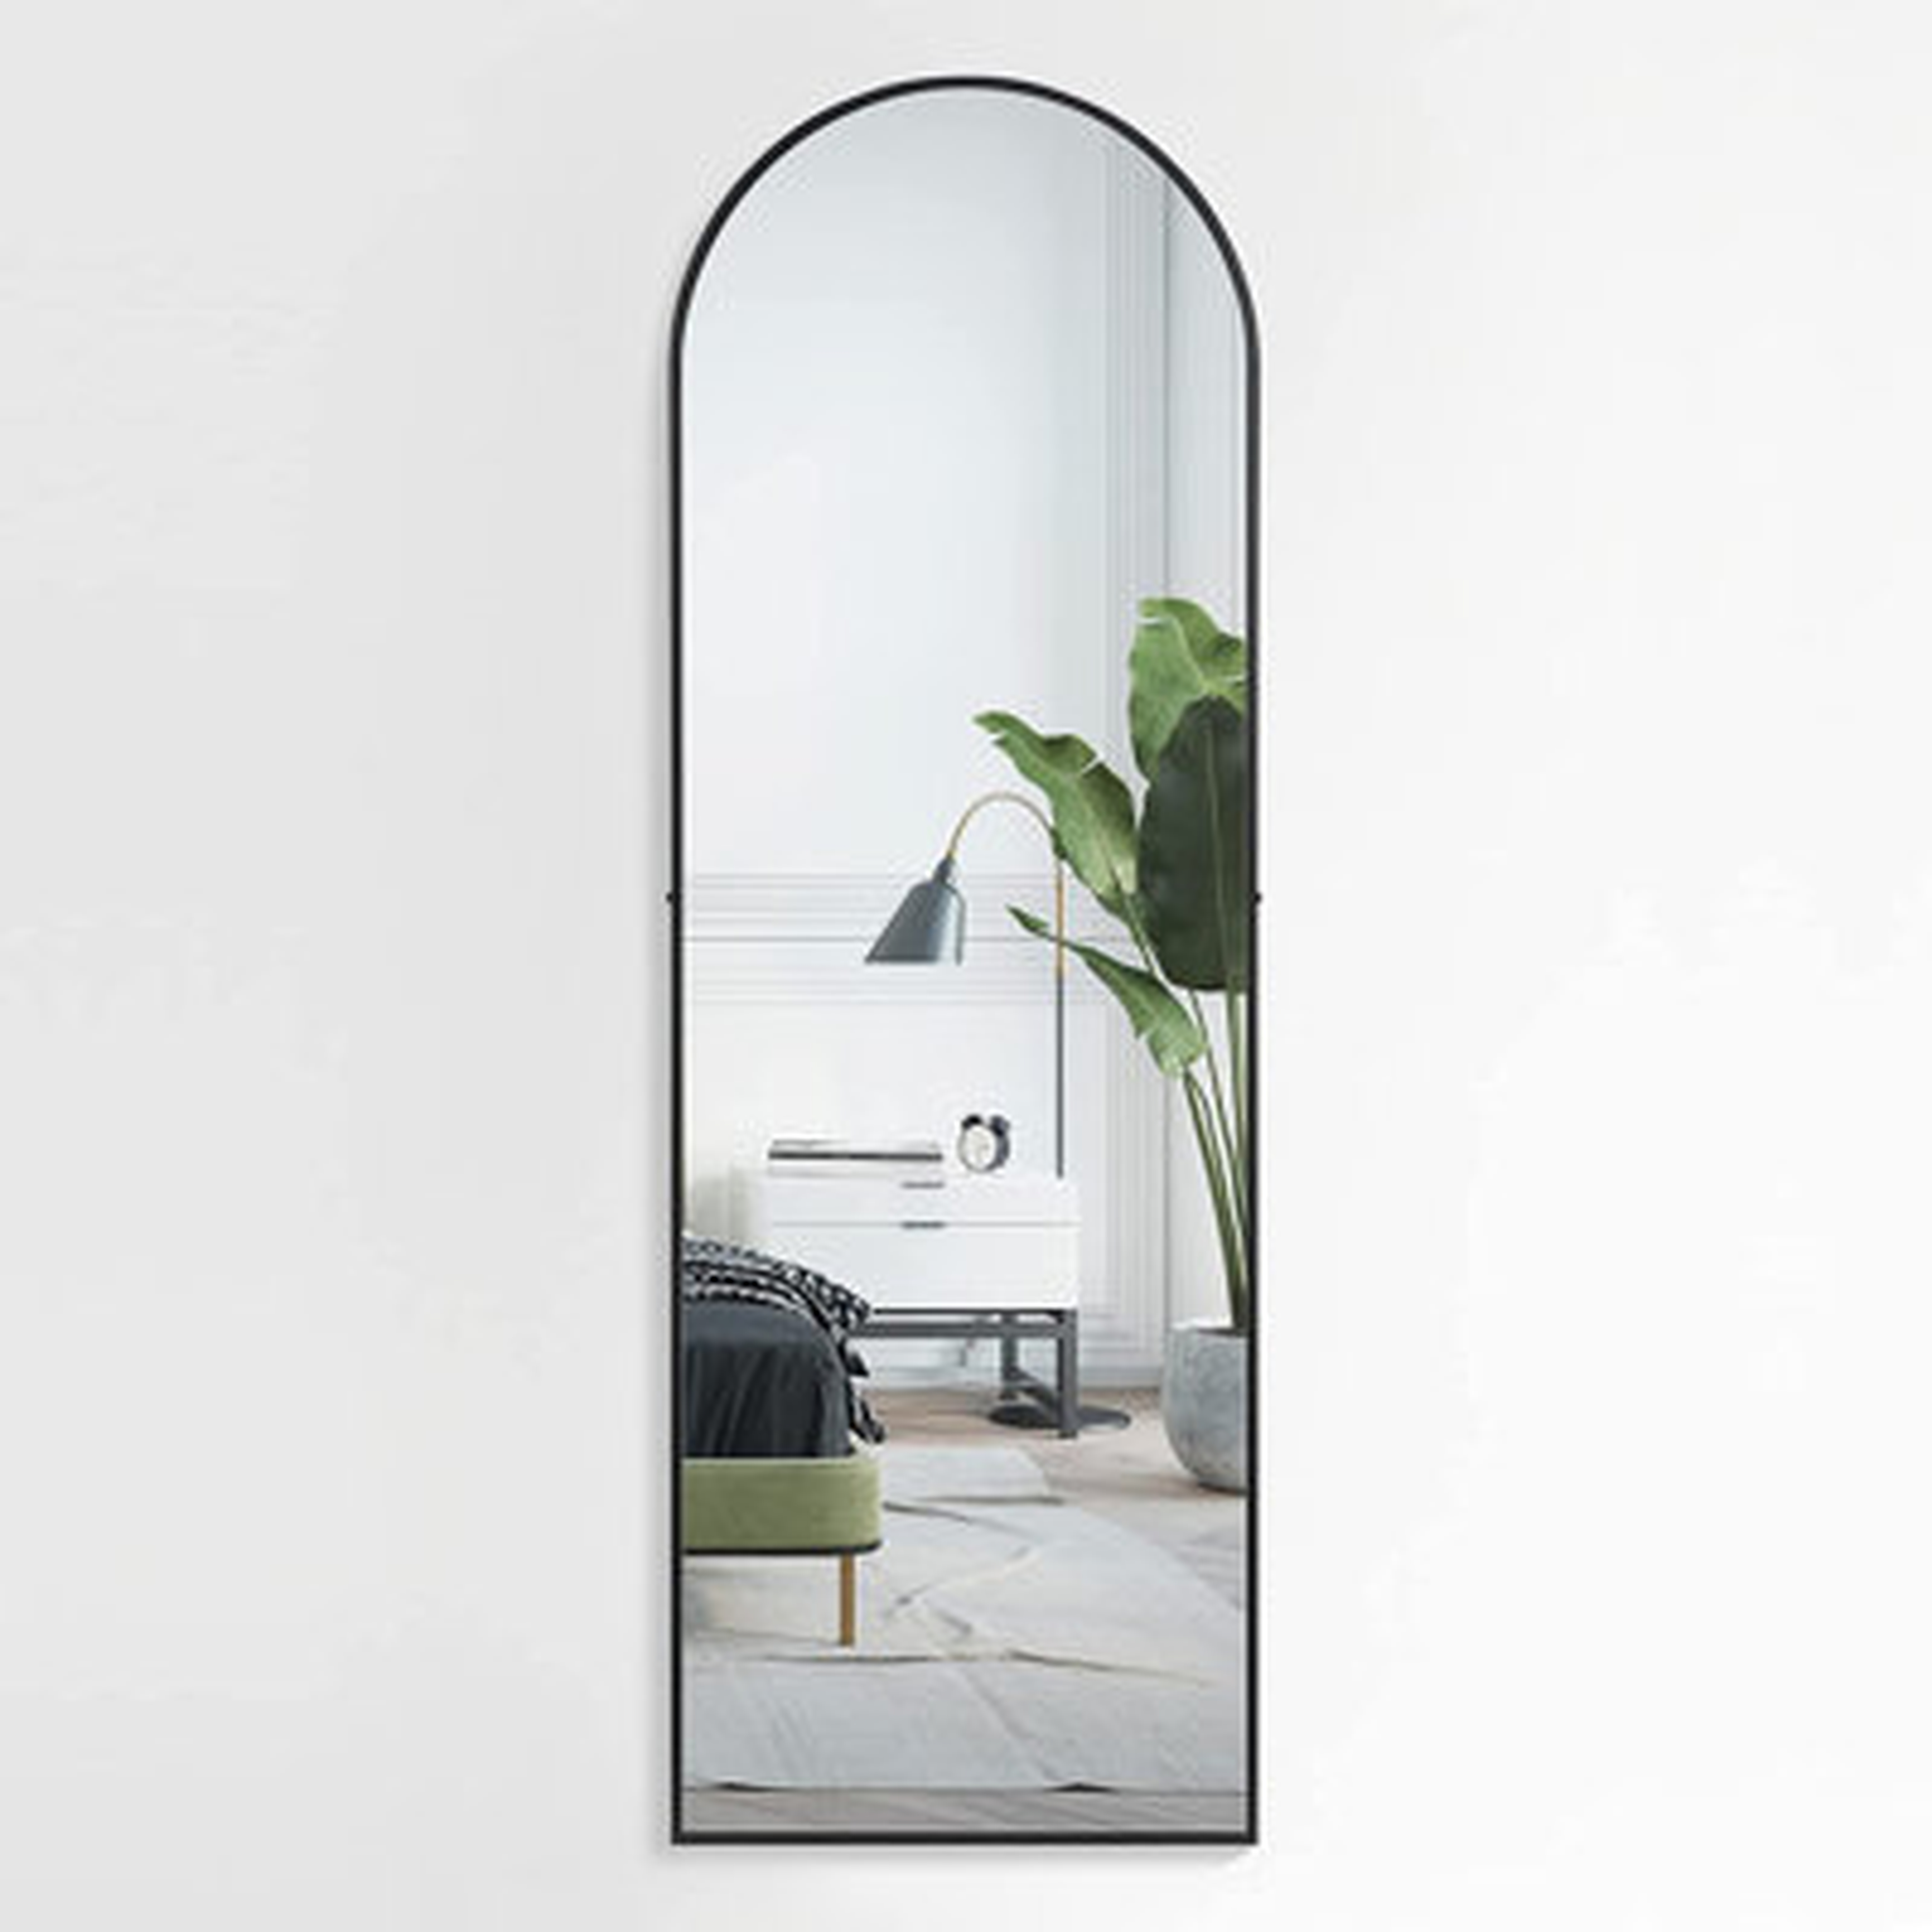 Full Length Mirror  Arched-top Full Body Mirror With Stand, Floor Mirror & Wall-mounted Mirror - Wayfair